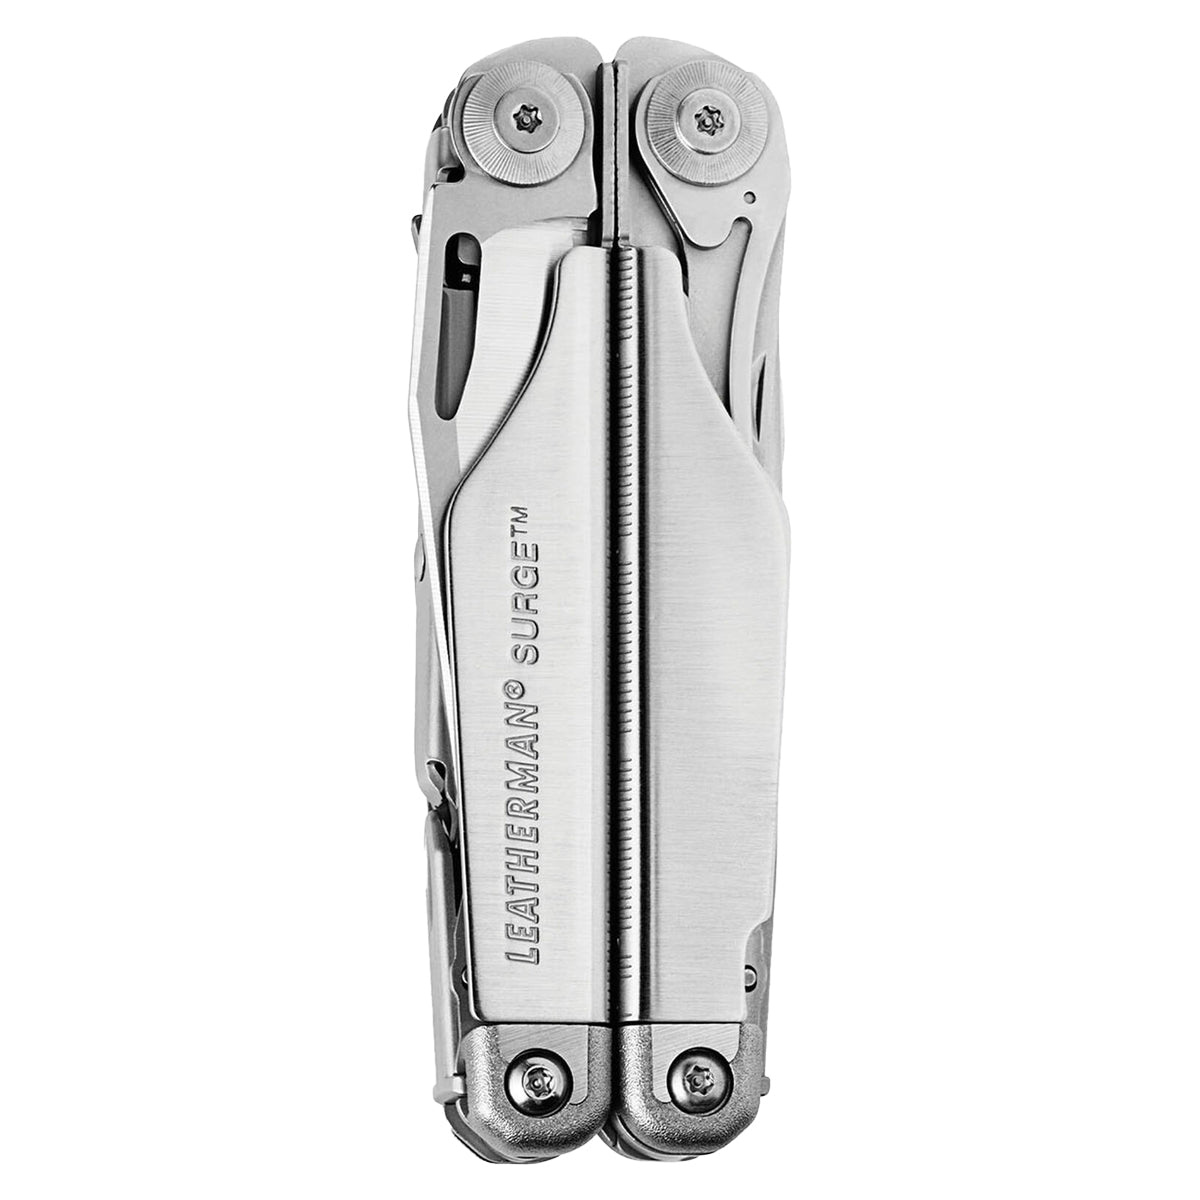 Leatherman Surge in  by GOHUNT | Leatherman - GOHUNT Shop